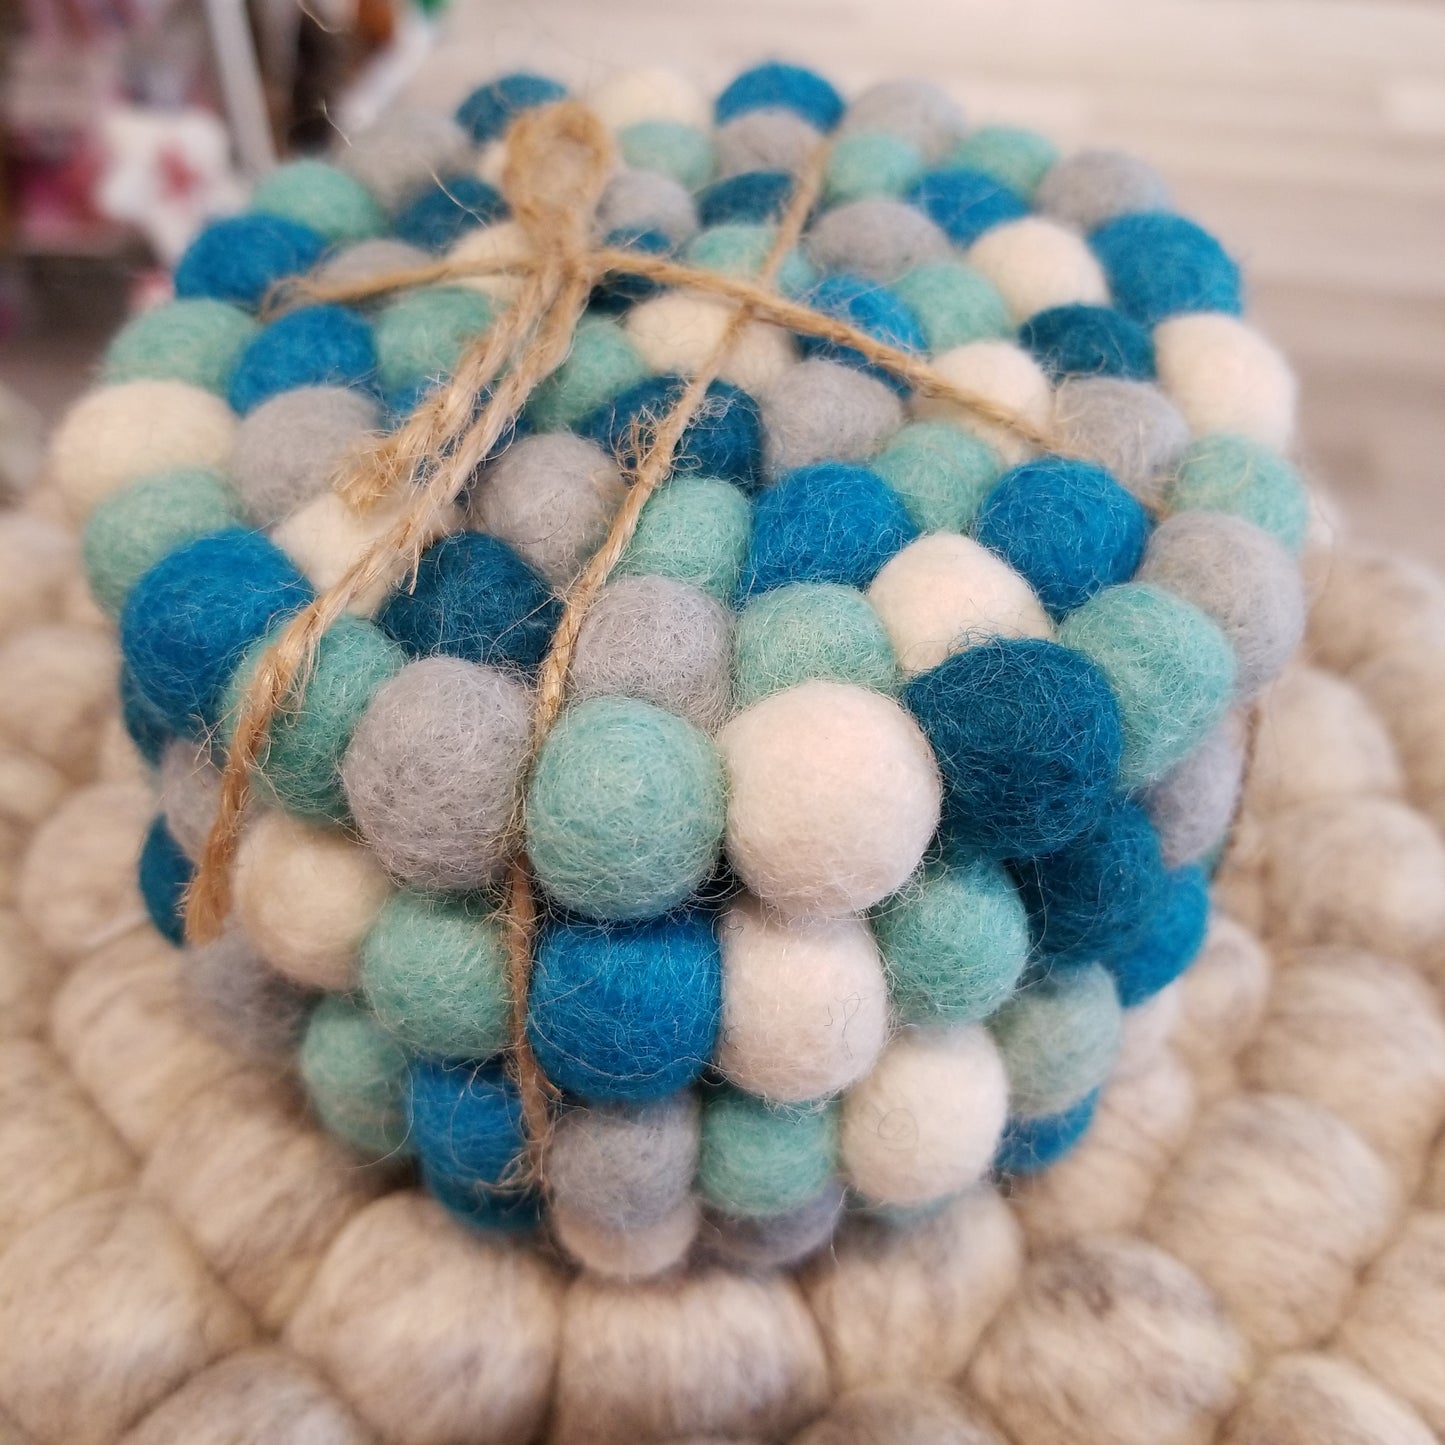 Felted Wool Coasters - Handmade 100% Wool - Lots of Choices!